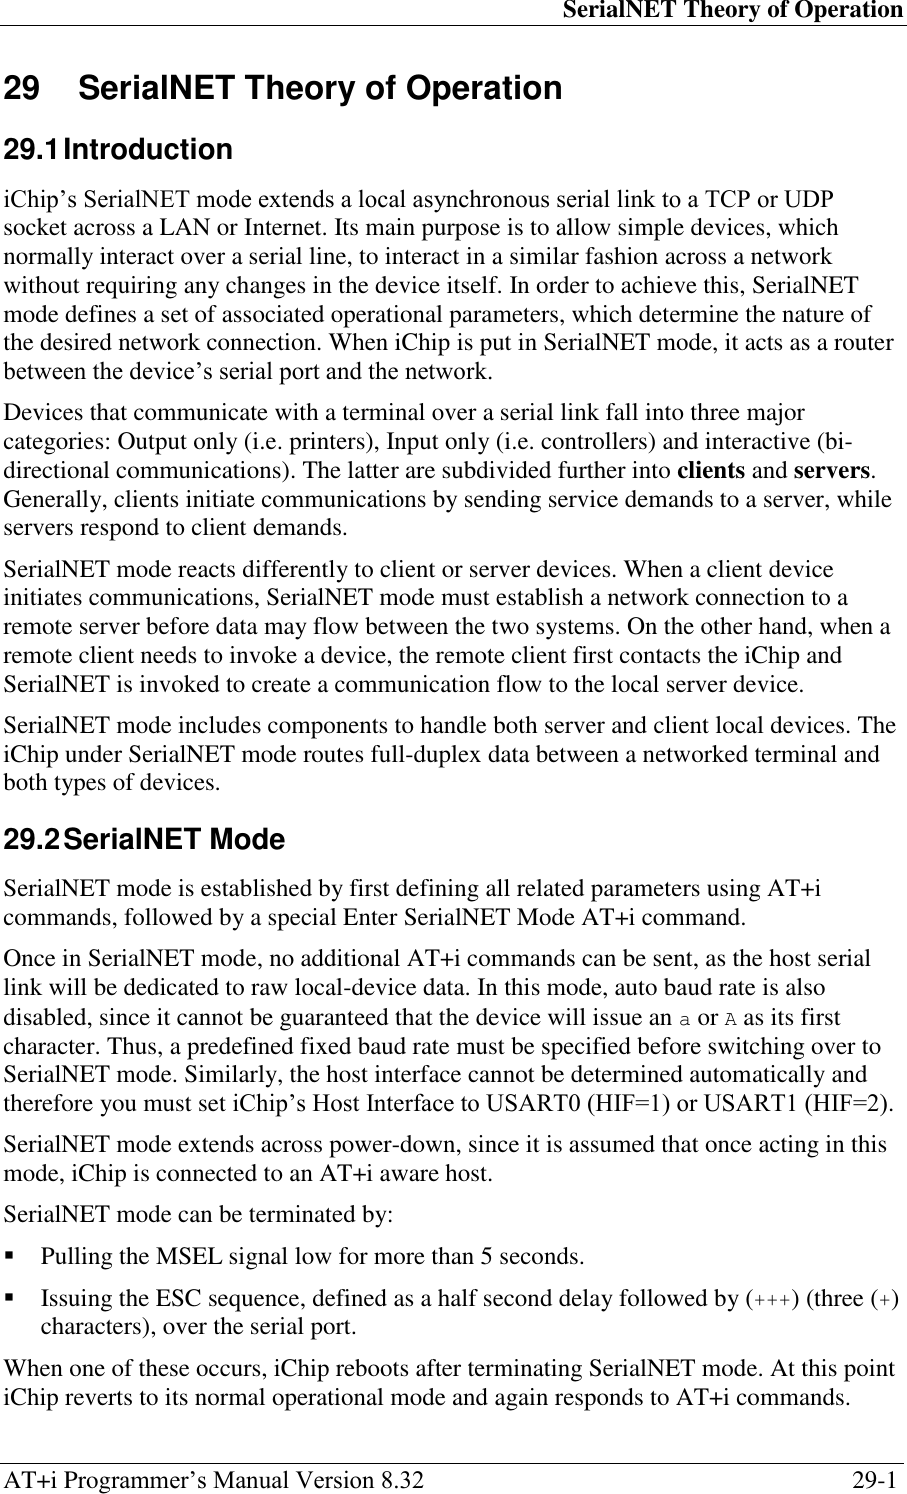 SerialNET Theory of Operation AT+i Programmer‘s Manual Version 8.32  29-1 29  SerialNET Theory of Operation 29.1 Introduction iChip‘s SerialNET mode extends a local asynchronous serial link to a TCP or UDP socket across a LAN or Internet. Its main purpose is to allow simple devices, which normally interact over a serial line, to interact in a similar fashion across a network without requiring any changes in the device itself. In order to achieve this, SerialNET mode defines a set of associated operational parameters, which determine the nature of the desired network connection. When iChip is put in SerialNET mode, it acts as a router between the device‘s serial port and the network. Devices that communicate with a terminal over a serial link fall into three major categories: Output only (i.e. printers), Input only (i.e. controllers) and interactive (bi-directional communications). The latter are subdivided further into clients and servers. Generally, clients initiate communications by sending service demands to a server, while servers respond to client demands. SerialNET mode reacts differently to client or server devices. When a client device initiates communications, SerialNET mode must establish a network connection to a remote server before data may flow between the two systems. On the other hand, when a remote client needs to invoke a device, the remote client first contacts the iChip and SerialNET is invoked to create a communication flow to the local server device. SerialNET mode includes components to handle both server and client local devices. The iChip under SerialNET mode routes full-duplex data between a networked terminal and both types of devices. 29.2 SerialNET Mode SerialNET mode is established by first defining all related parameters using AT+i commands, followed by a special Enter SerialNET Mode AT+i command. Once in SerialNET mode, no additional AT+i commands can be sent, as the host serial link will be dedicated to raw local-device data. In this mode, auto baud rate is also disabled, since it cannot be guaranteed that the device will issue an a or A as its first character. Thus, a predefined fixed baud rate must be specified before switching over to SerialNET mode. Similarly, the host interface cannot be determined automatically and therefore you must set iChip‘s Host Interface to USART0 (HIF=1) or USART1 (HIF=2). SerialNET mode extends across power-down, since it is assumed that once acting in this mode, iChip is connected to an AT+i aware host. SerialNET mode can be terminated by:  Pulling the MSEL signal low for more than 5 seconds.  Issuing the ESC sequence, defined as a half second delay followed by (+++) (three (+) characters), over the serial port. When one of these occurs, iChip reboots after terminating SerialNET mode. At this point iChip reverts to its normal operational mode and again responds to AT+i commands. 